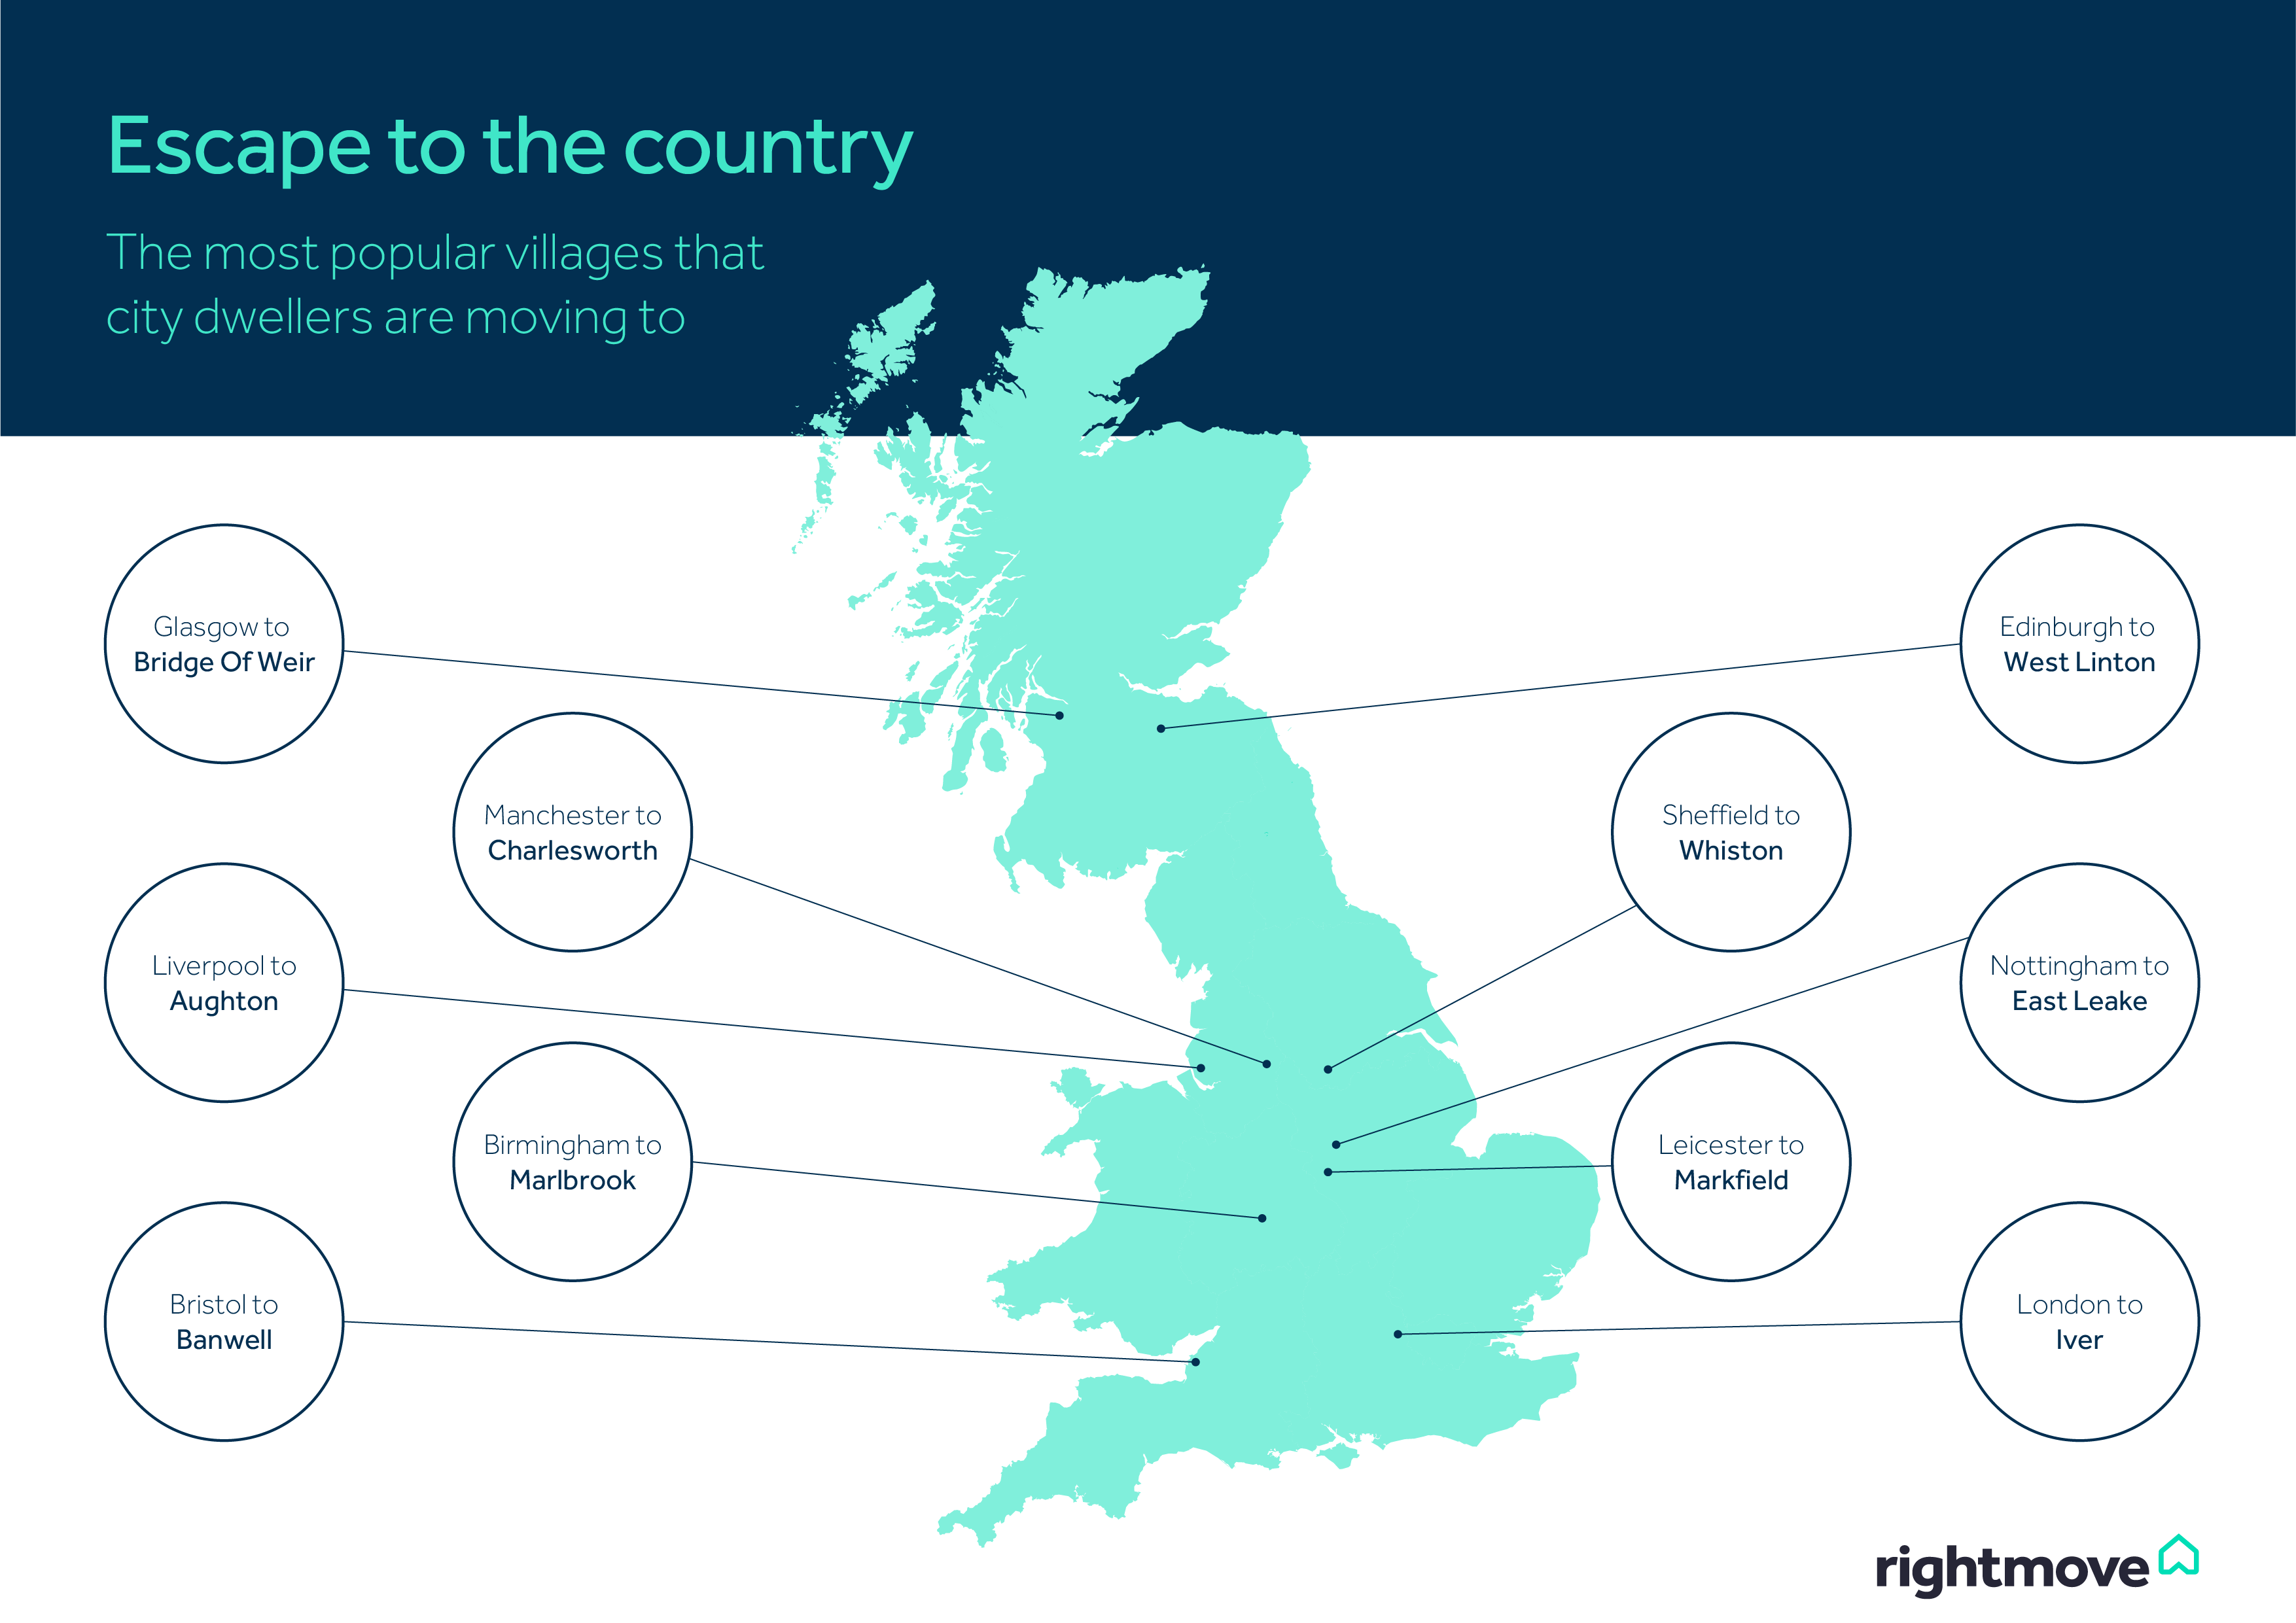 Rightmove's map shows popular locations city dwellers are interested in moving to